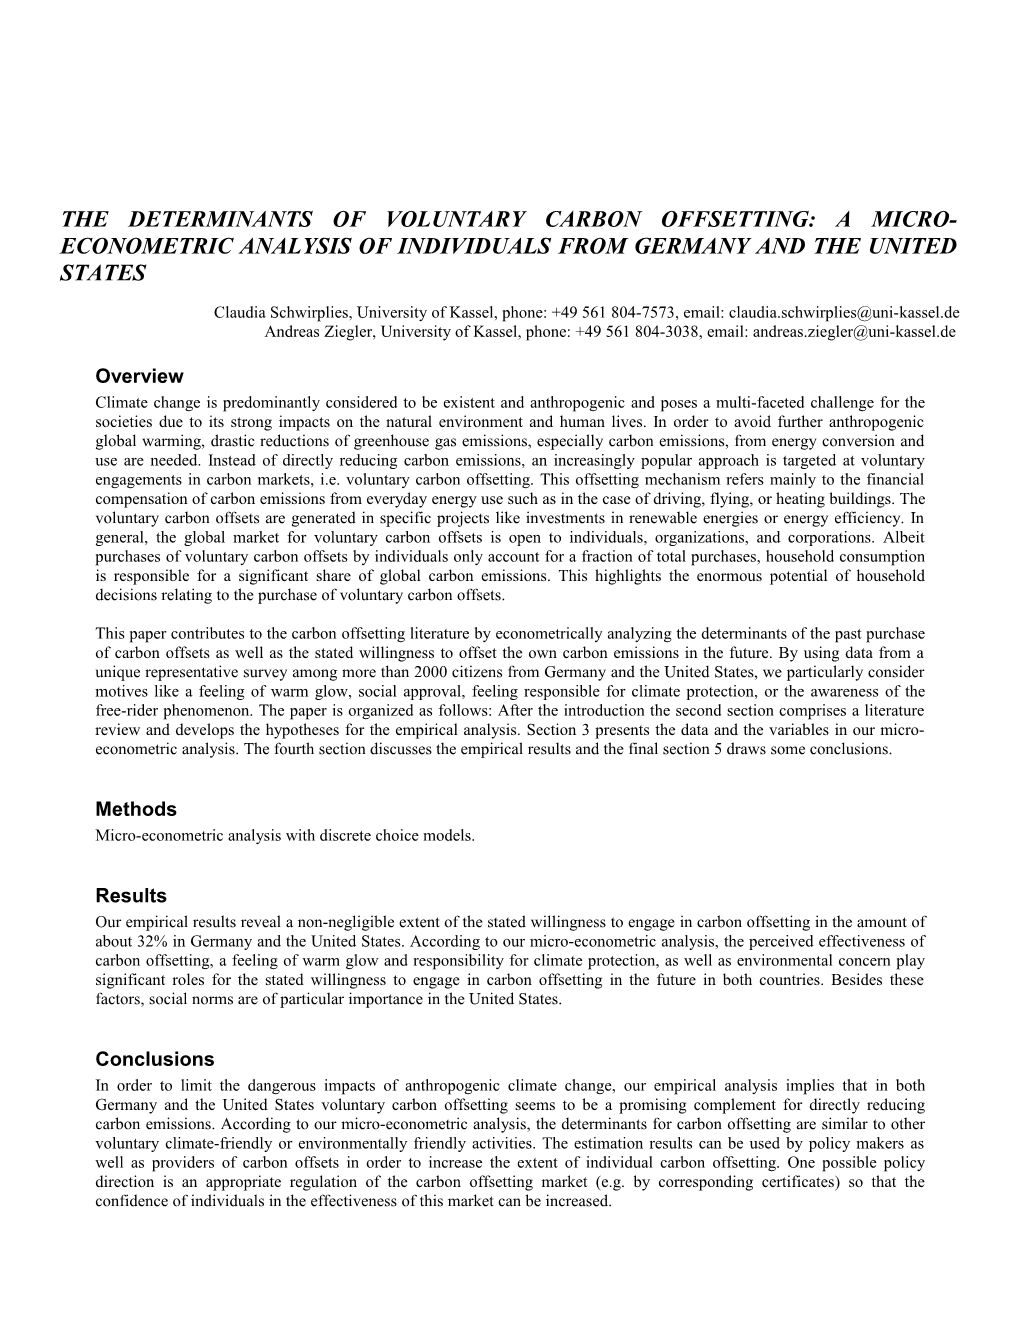 The Determinants of Voluntary Carbon Offsetting: a Micro-Econometric Analysis of Individuals